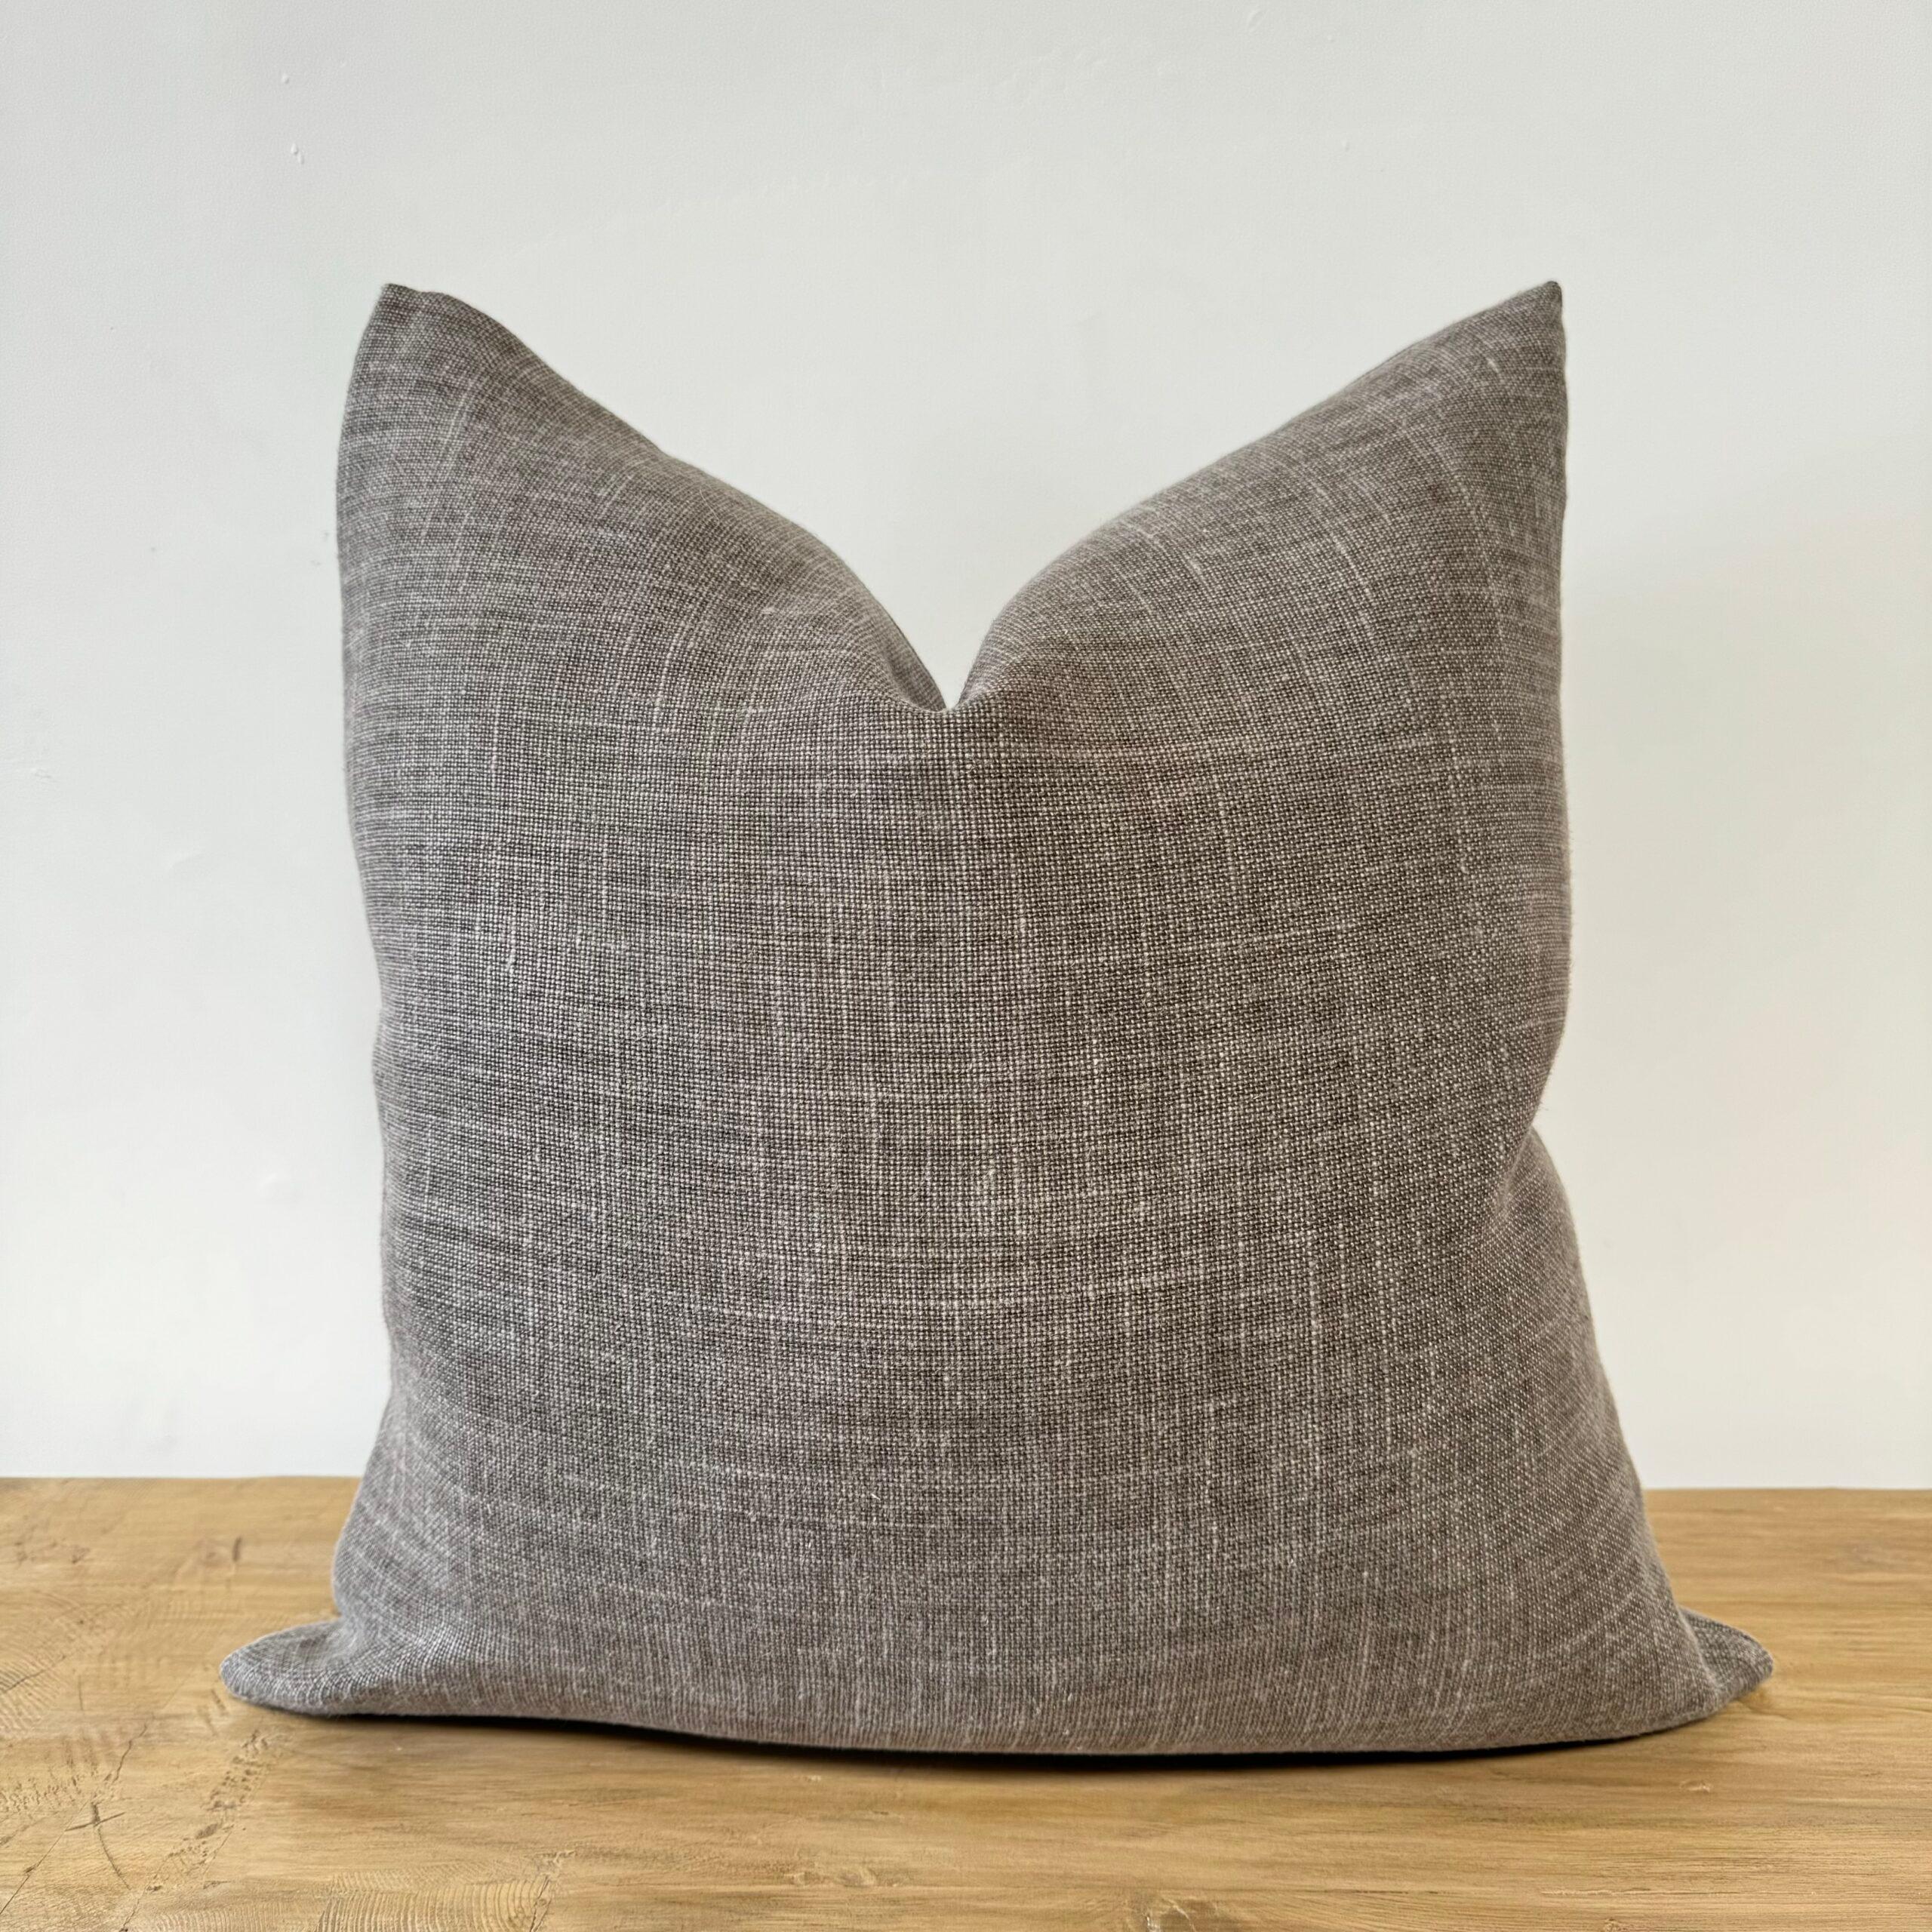 Linen Blend pillow in a natural color with a stone wash finish.
Antique Brass Zipper closure
Overlocked seams.
Includes Down Feather Insert
Color: Ecorce / Deep Natural with Eggplant color hues
Size: 22x22
51,000 Double Rubs
Extremely soft to the